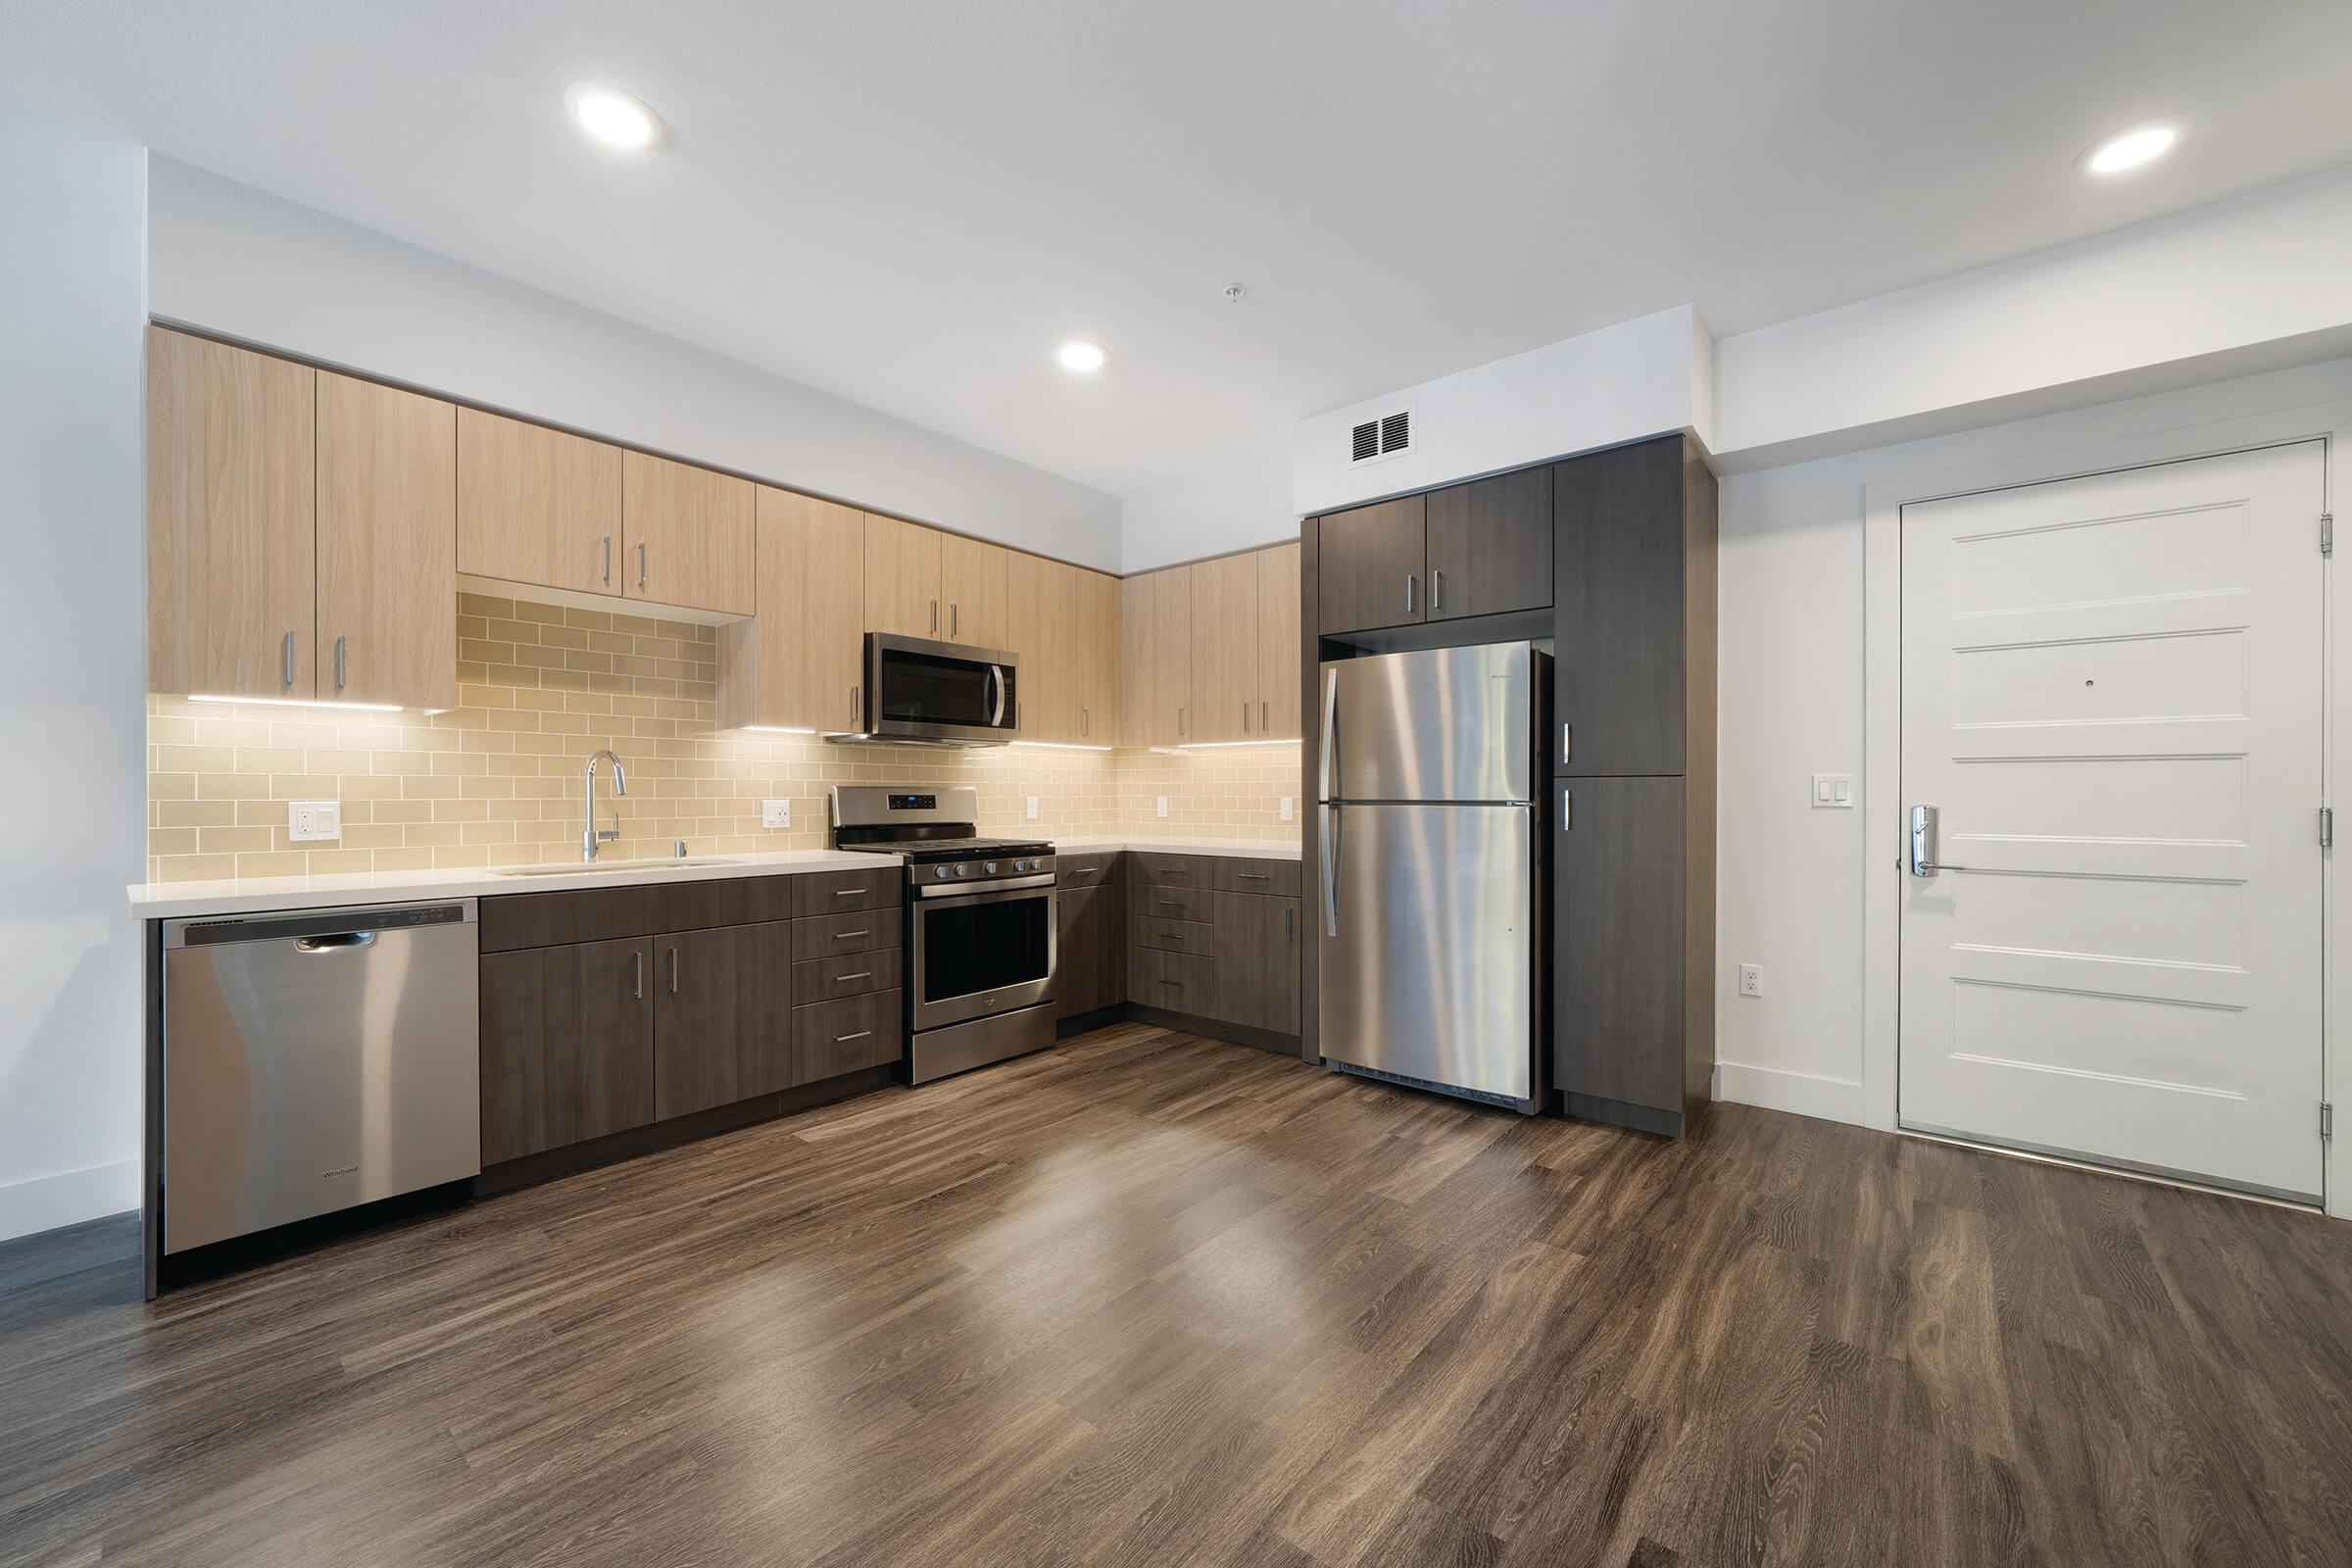 Vacant kitchen with stainless steel appliances